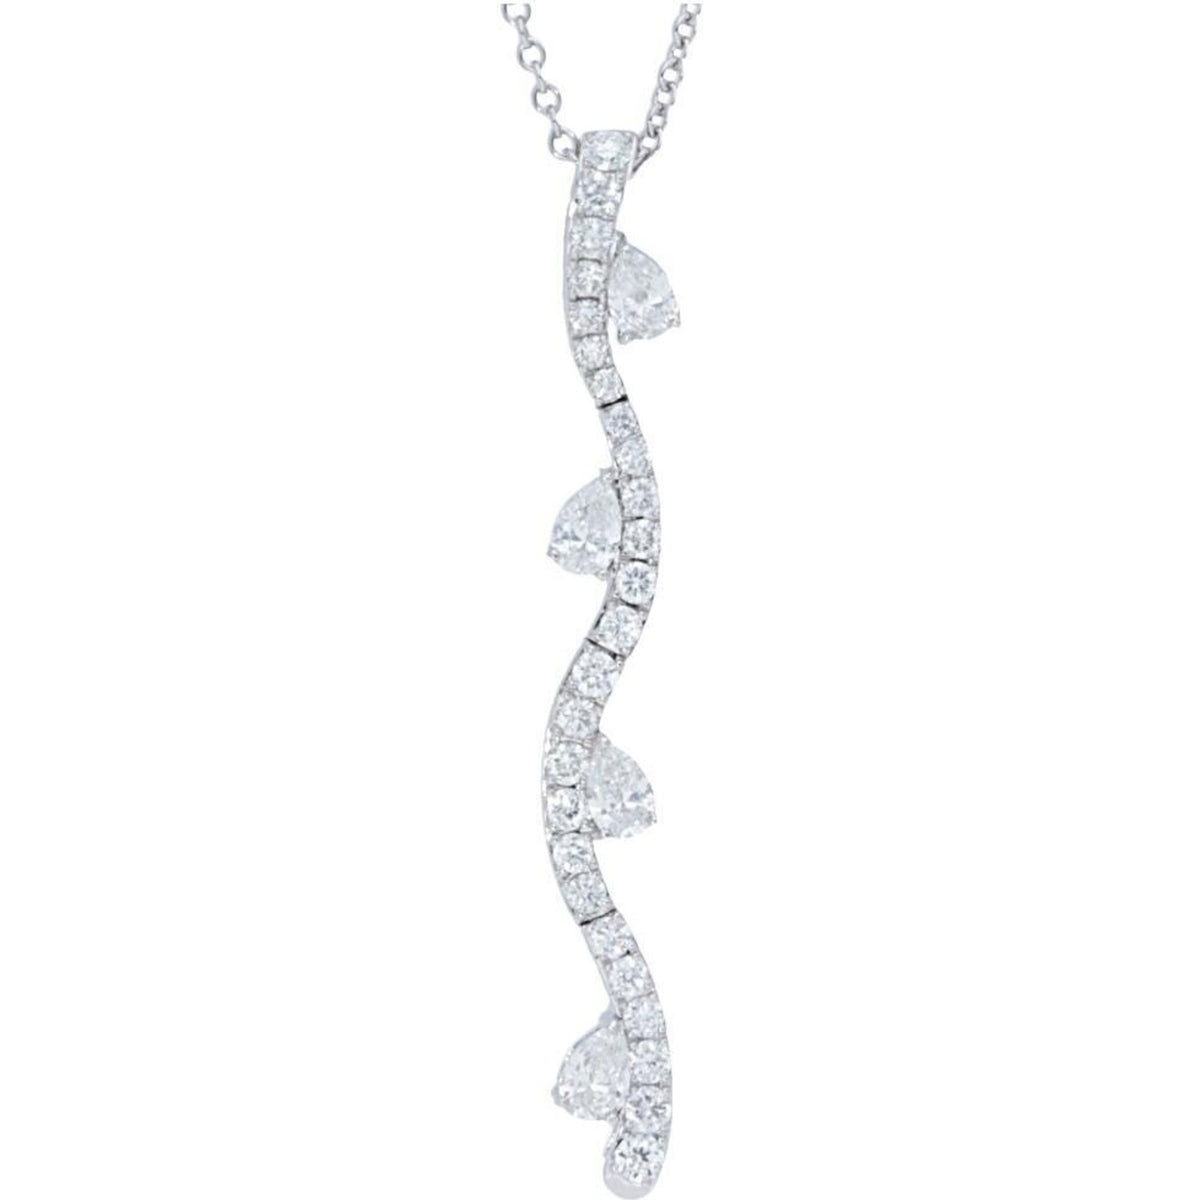 Sofer Jewelry - Wavy Pave Diamond Drop With Pear Diamond Pendant in 14K White Gold